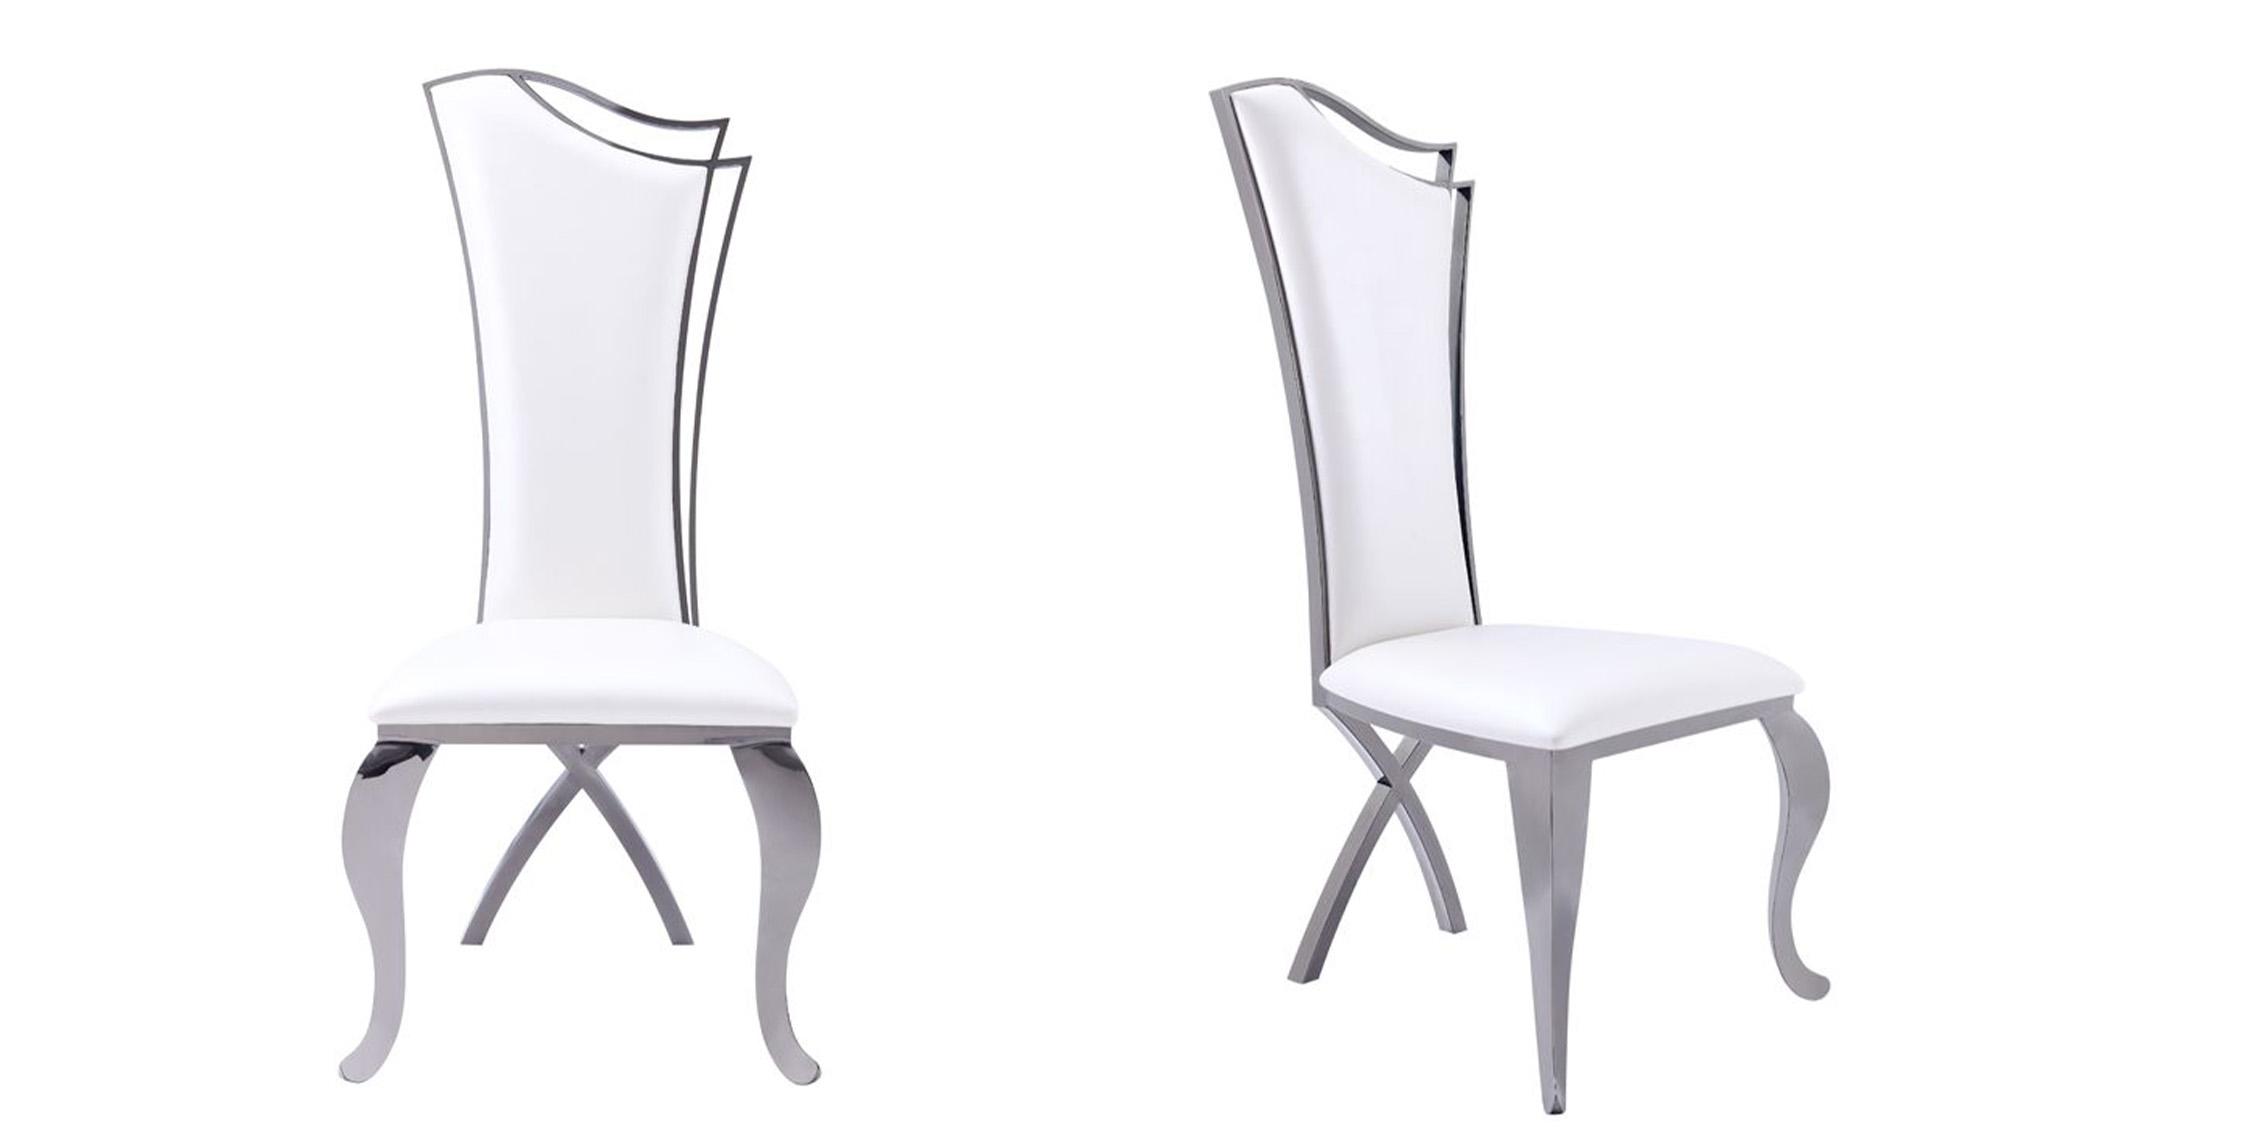 Contemporary, Modern Dining Chair Set VGZAY906-WHT VGZAY906-WHT in White Leatherette